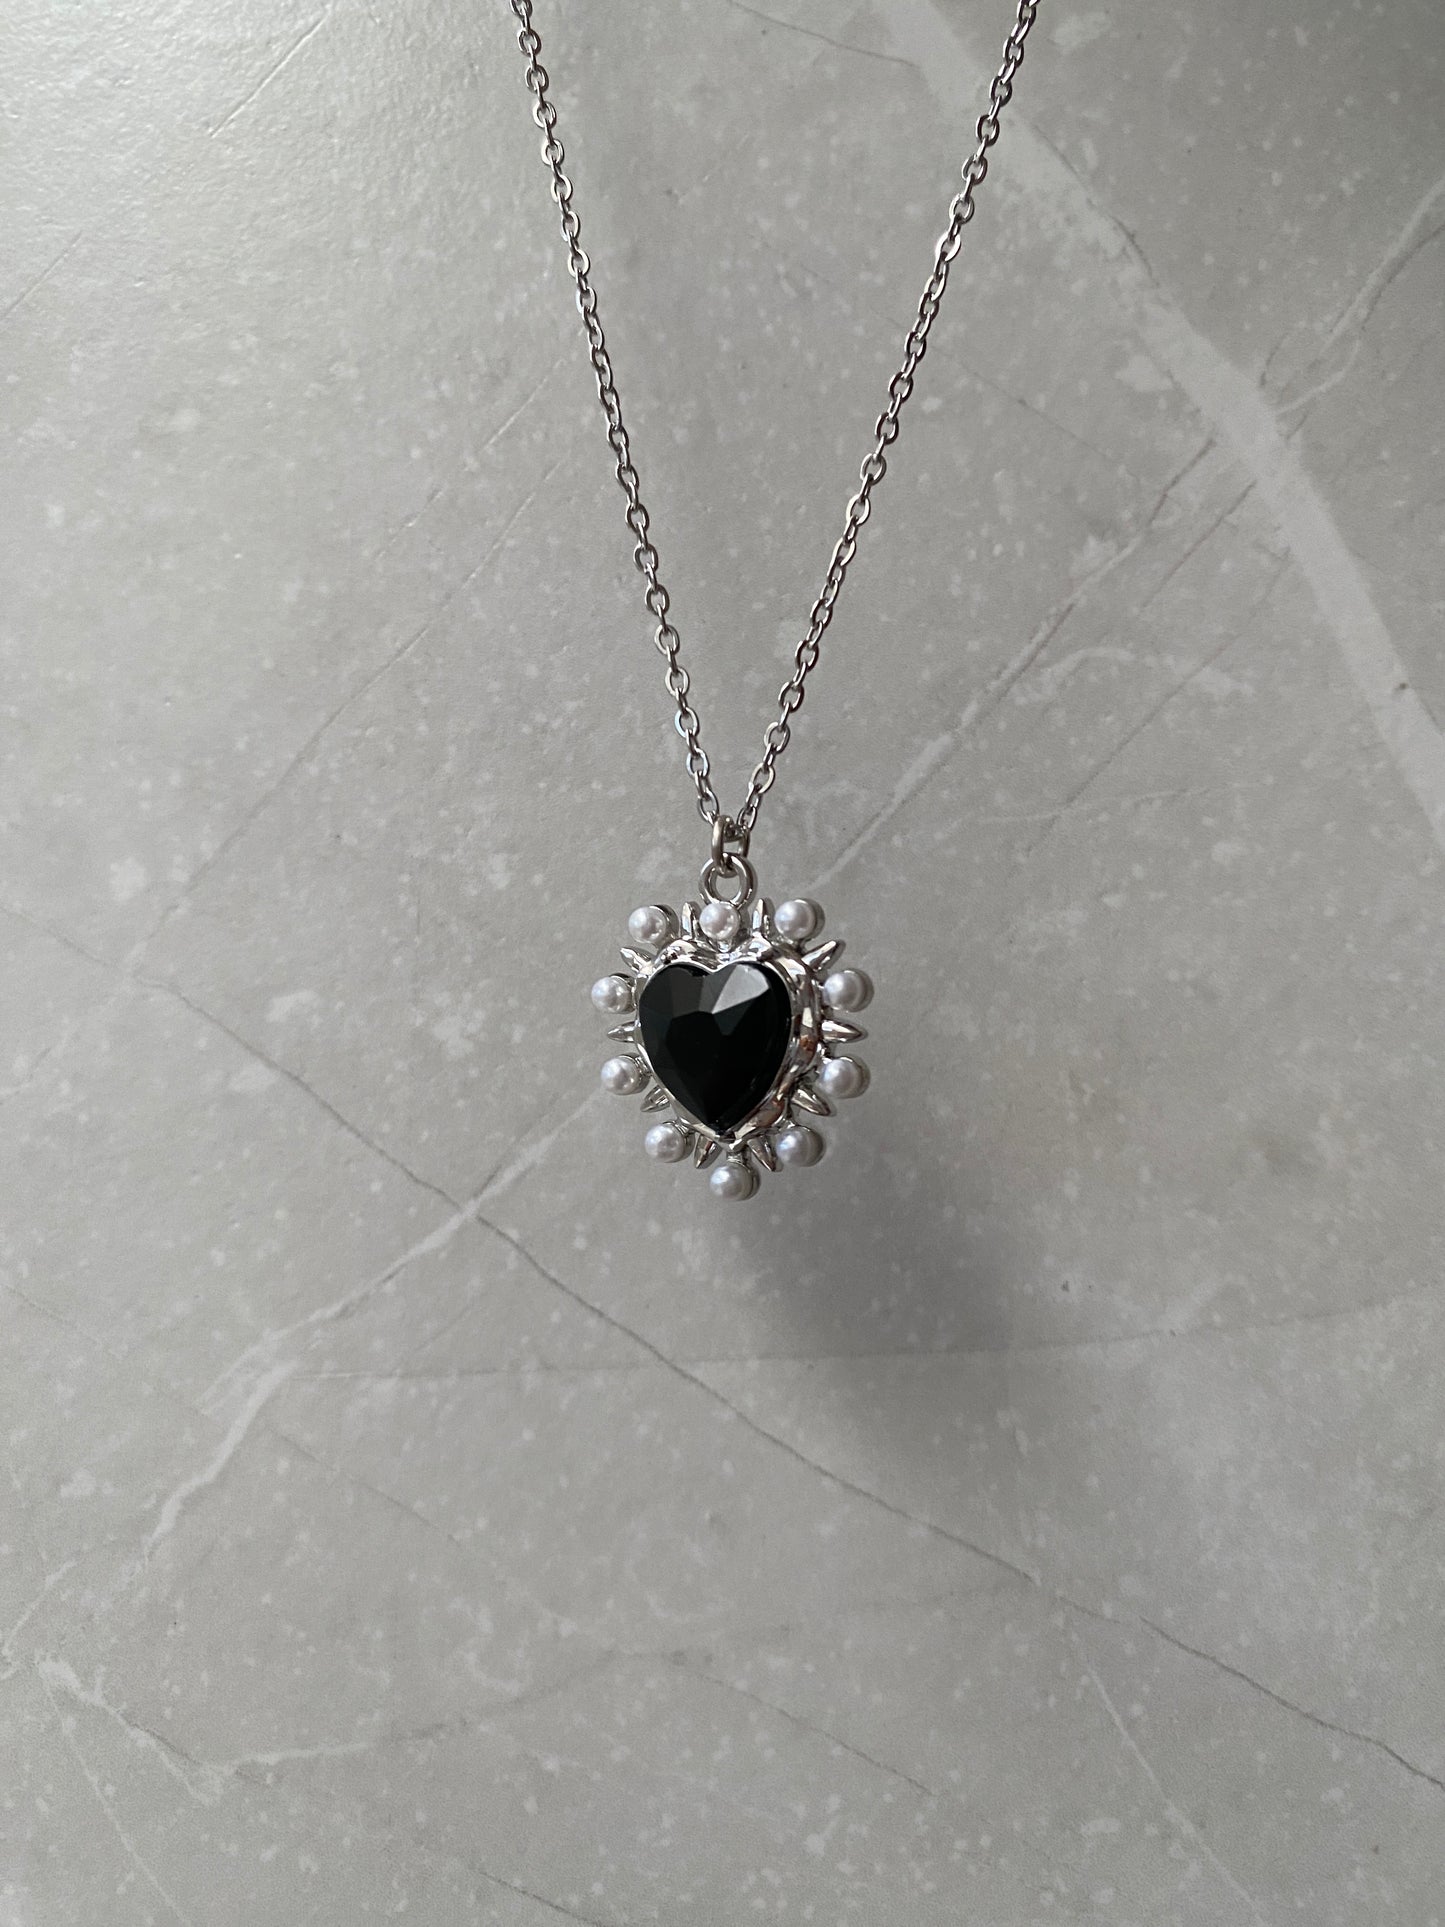 PEARLY BLACK CRYSTAL HEART NECKLACE WITH SILVER CHAIN